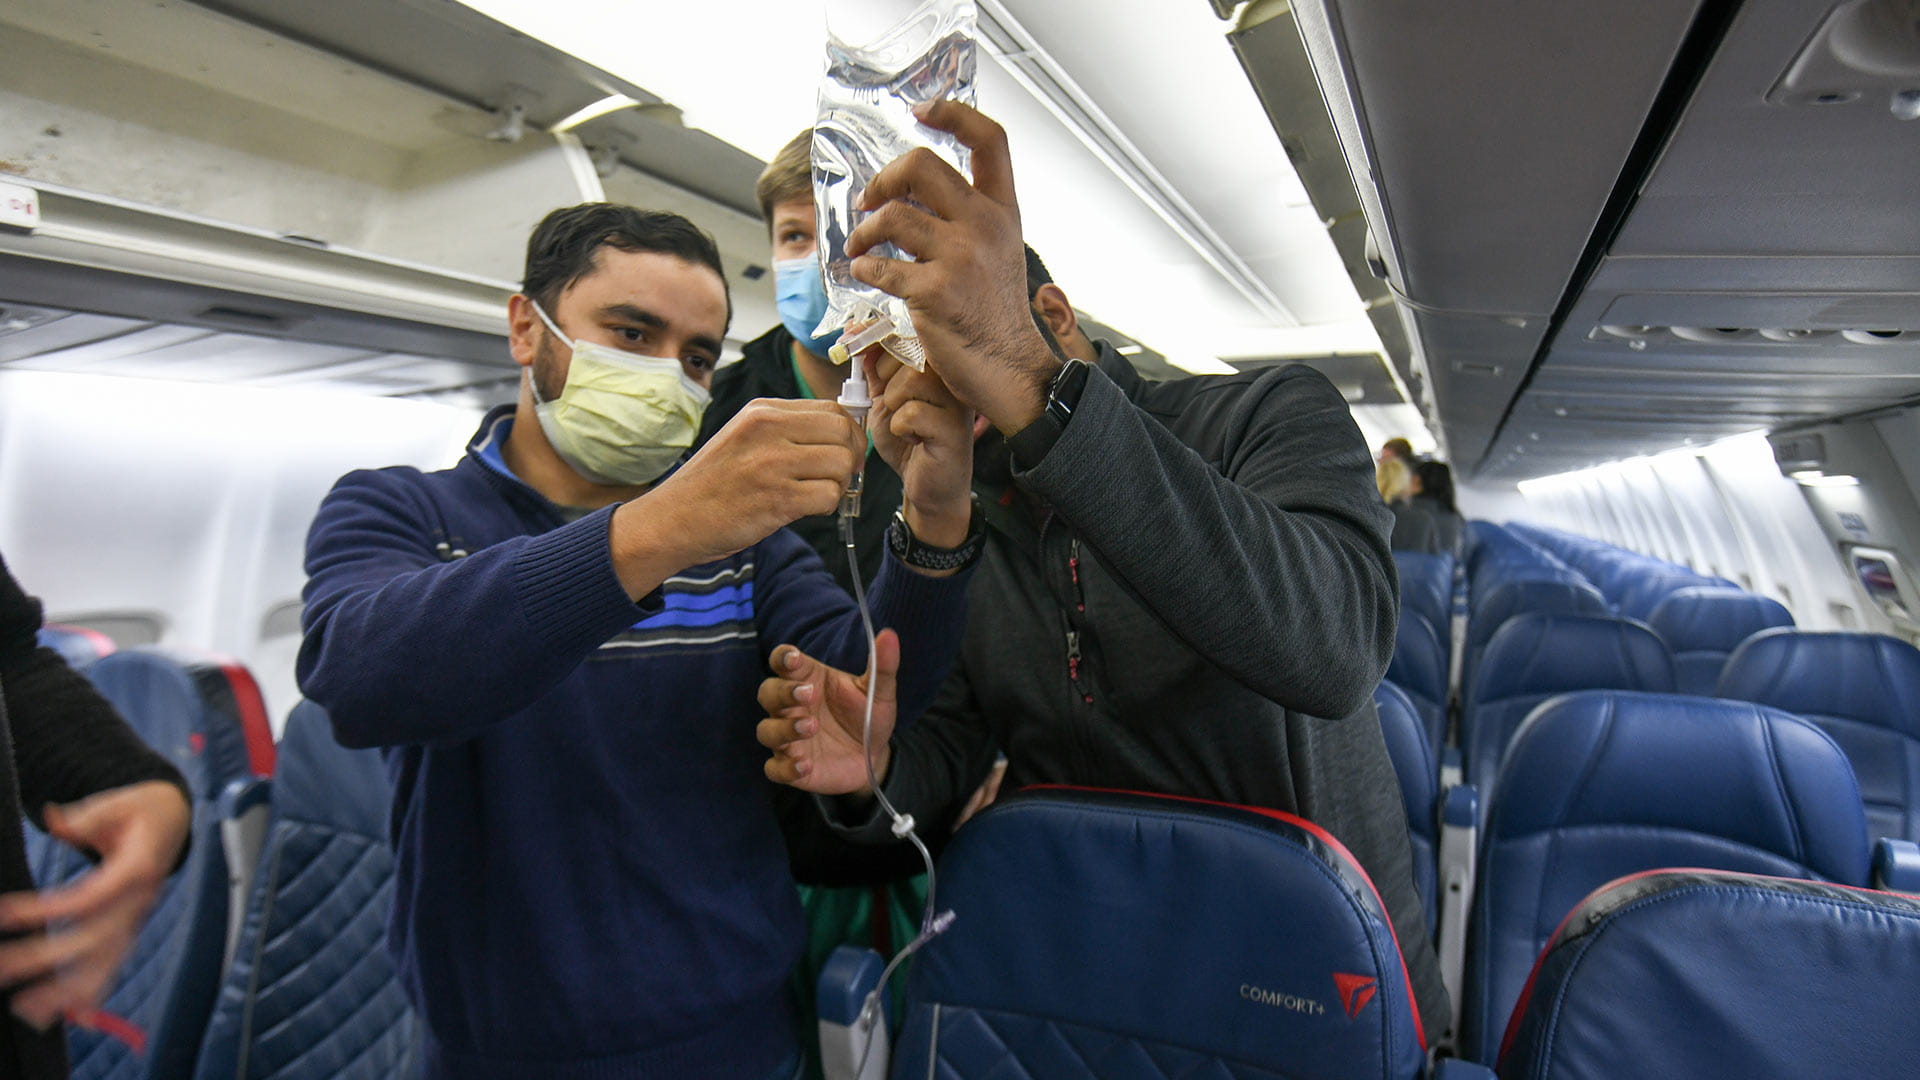 Students holding IV bag in the airplane